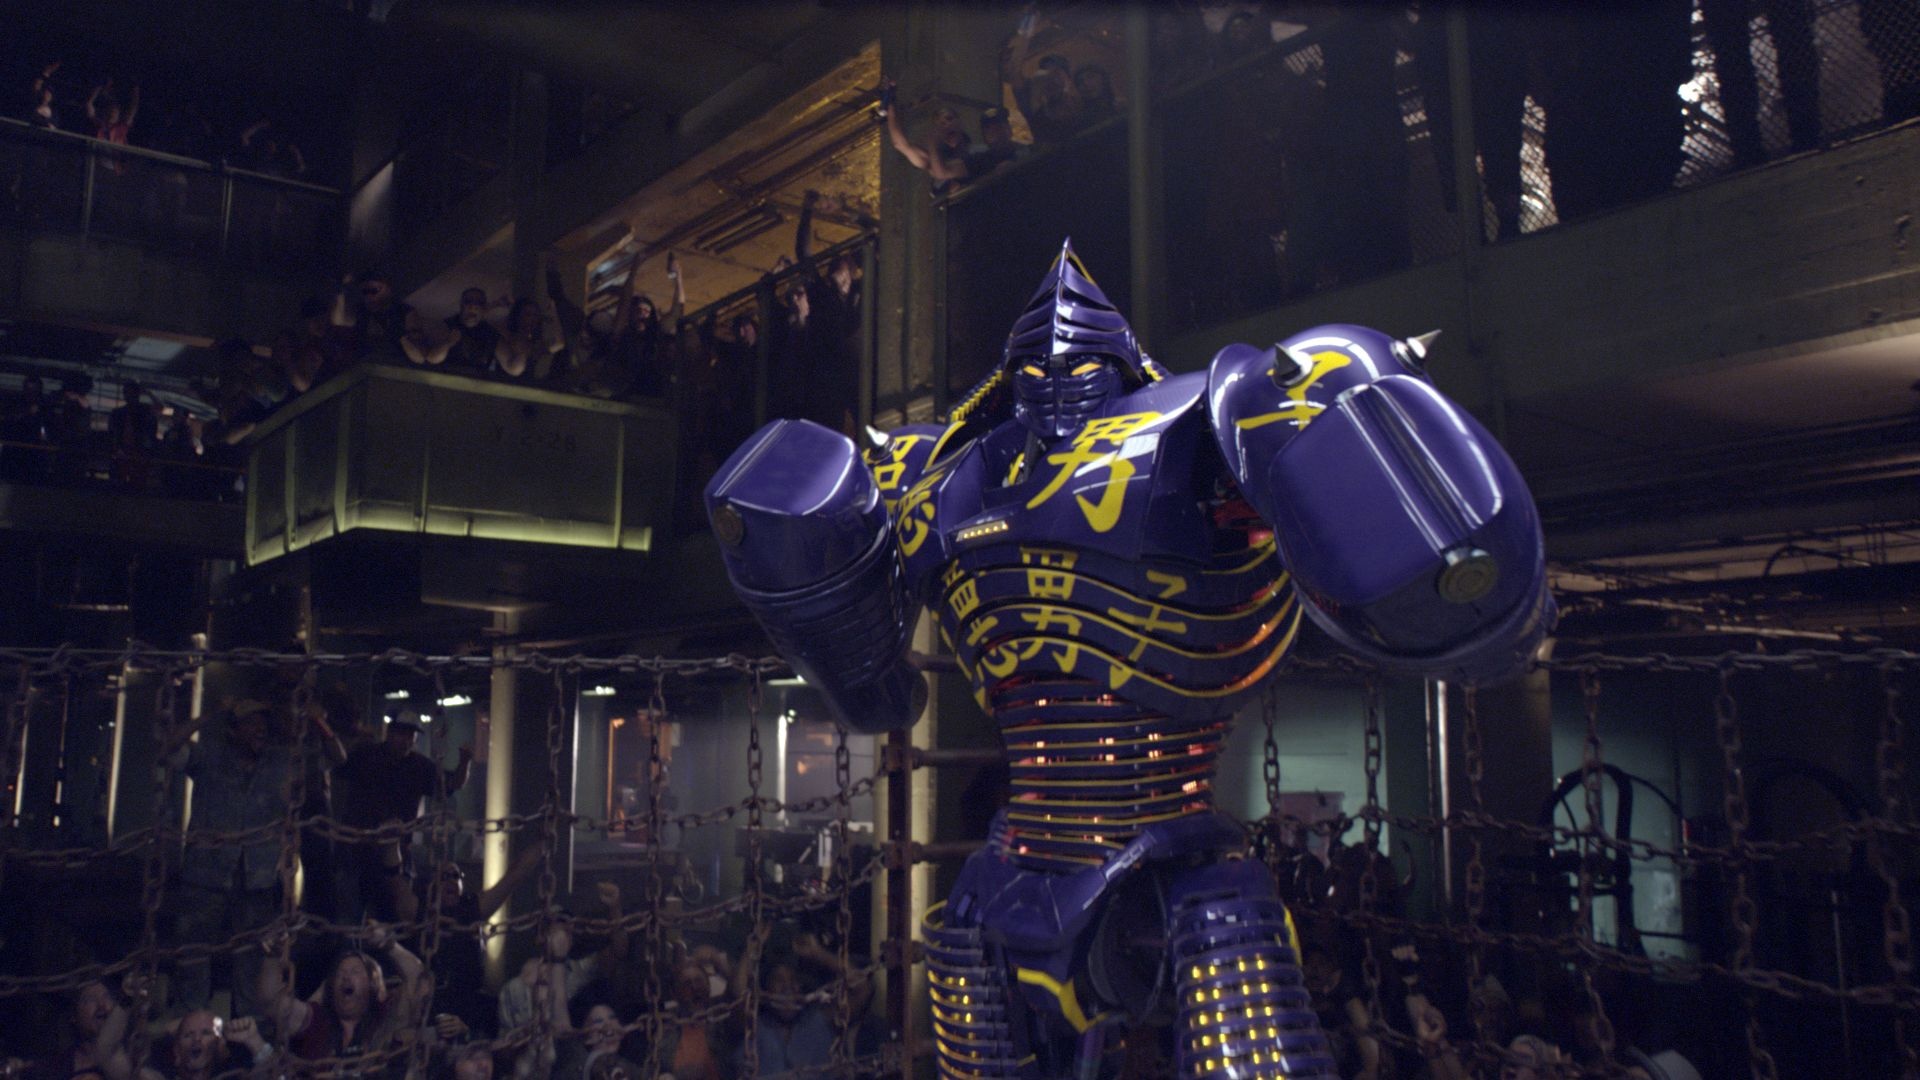 Real Steel: Atom, found in the junkyard and repaired by Max and Charlie. 1920x1080 Full HD Wallpaper.